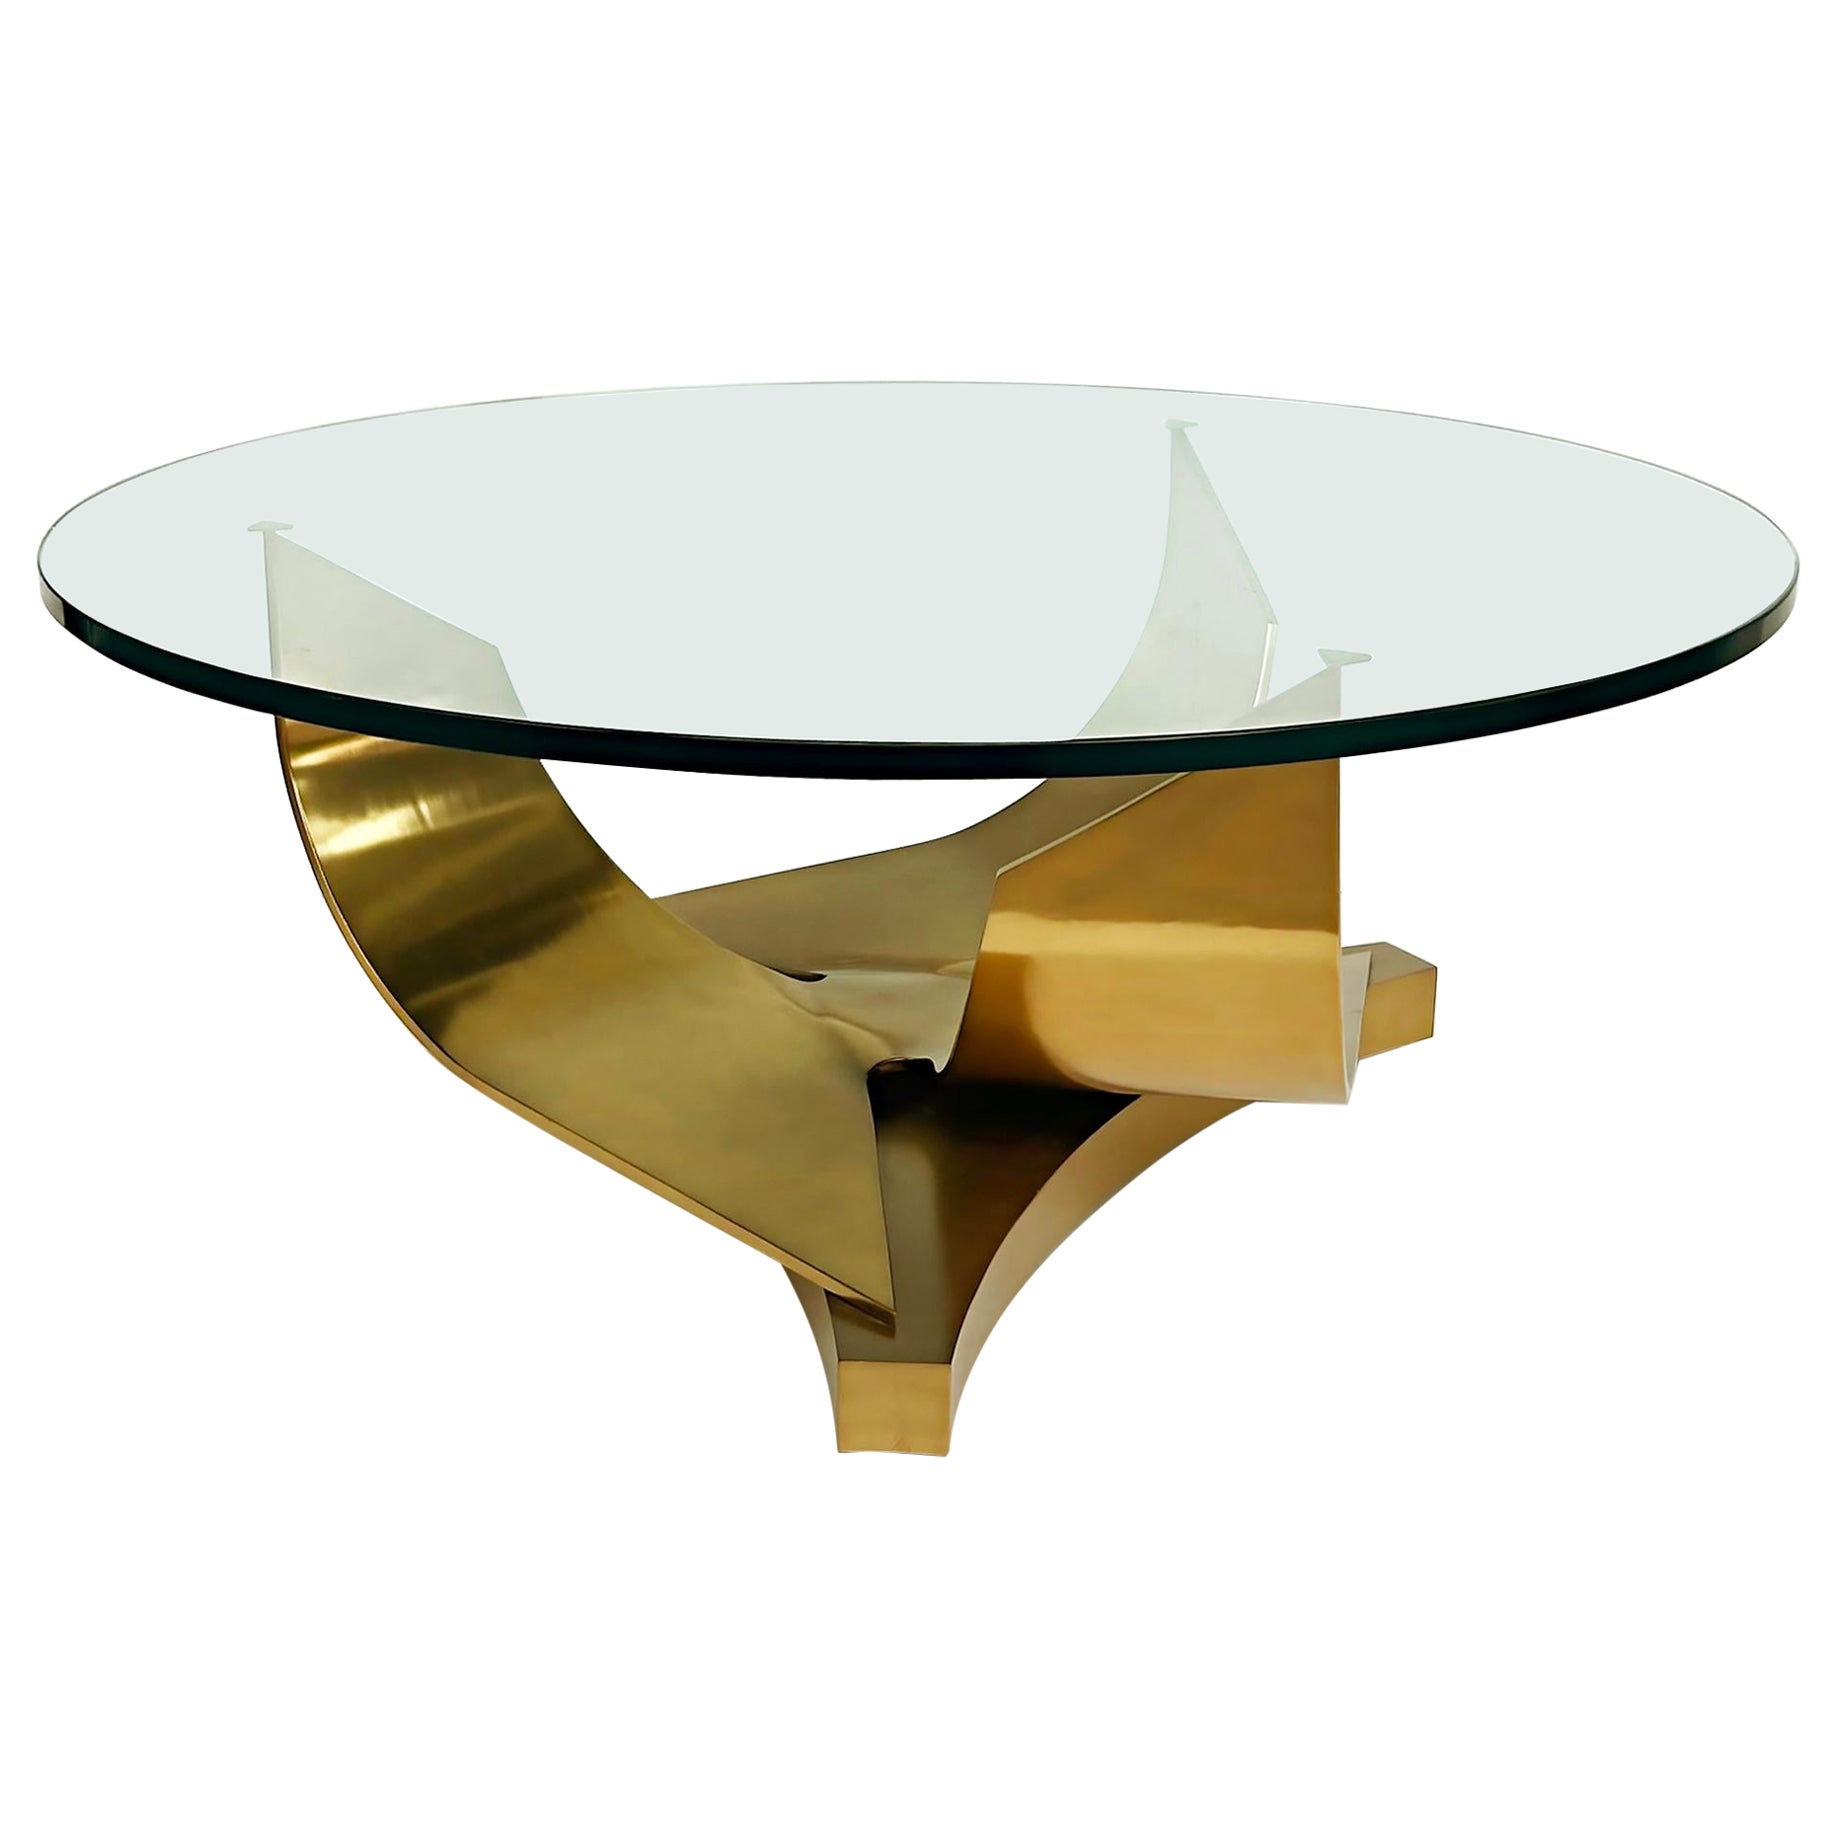 Sculptural Ron Seff Bronze "Coronet" Coffee Table 1980s with Glass Top